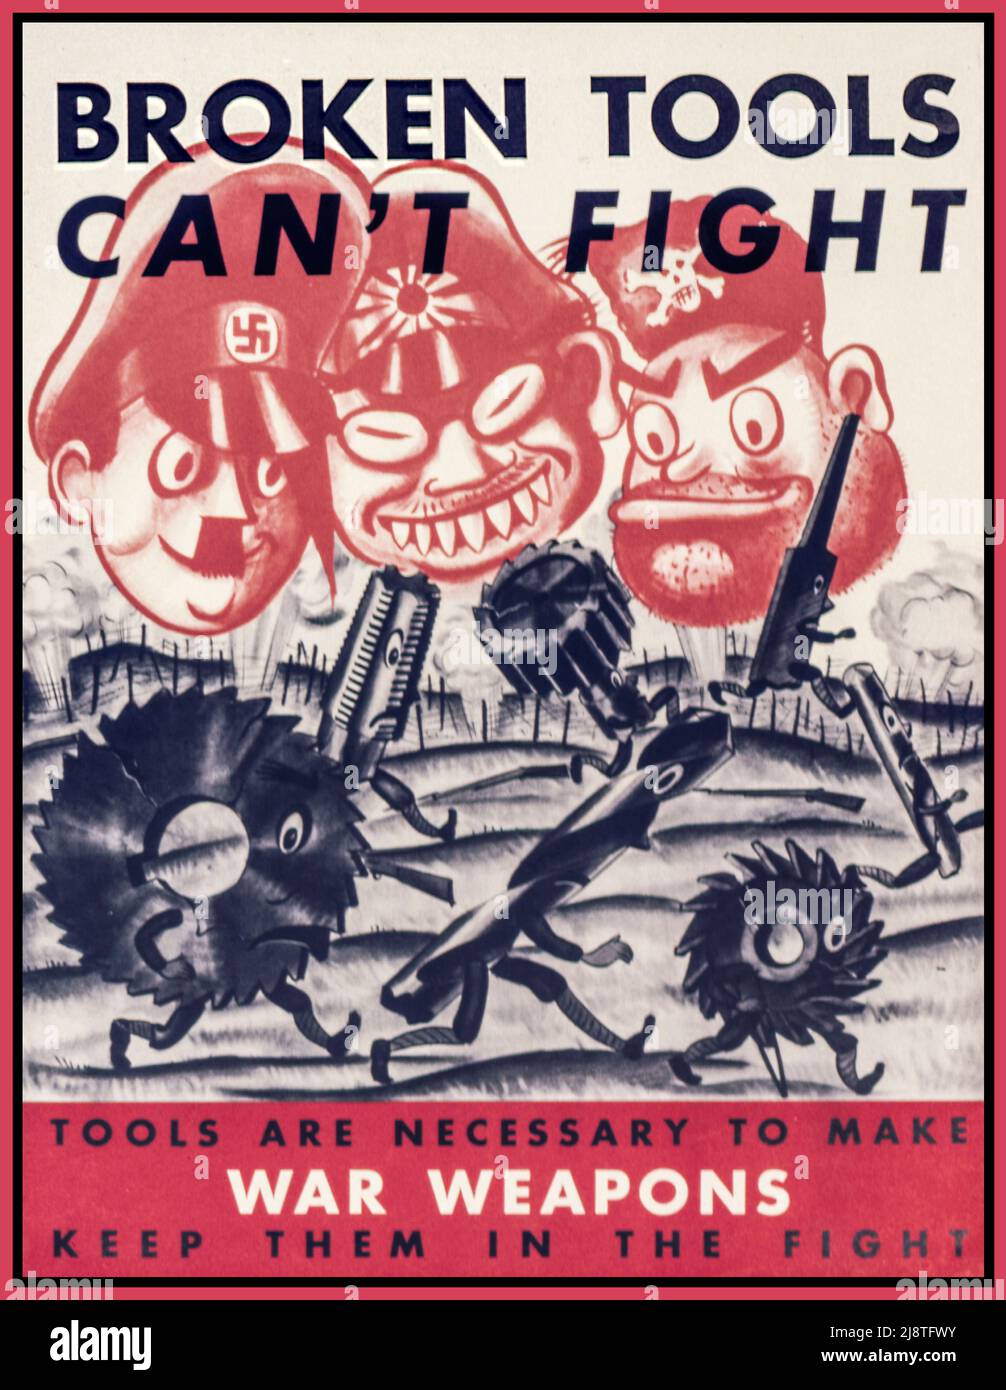 USA WW2 Propaganda Poster featuring the Axis leaders as cartoon caricatures , Adolf Hitler, Hideki Tojo and Benito Mussolini 'Broken tools can't fight. Tools are necessary to make war weapons. Keep them in the fight'. World War II Second World War Date between circa 1942 and circa 1943  Office for Emergency Management. War Production Board. (01/1942 - 11/03/1945) Stock Photo